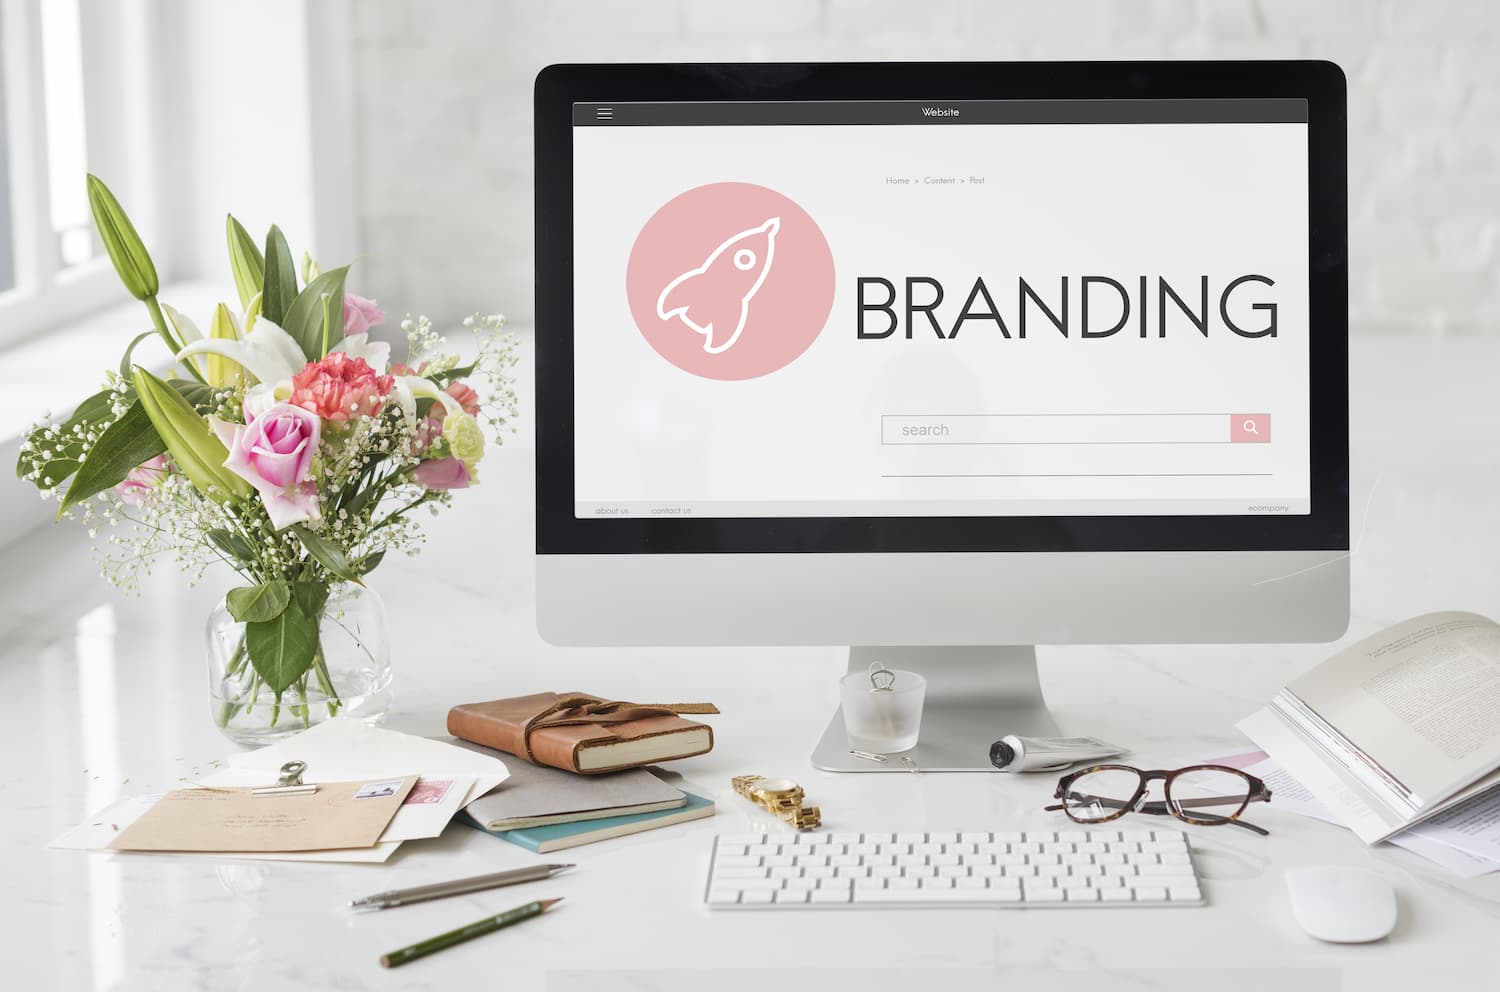 How to Apply Brand Strategy To Your Website